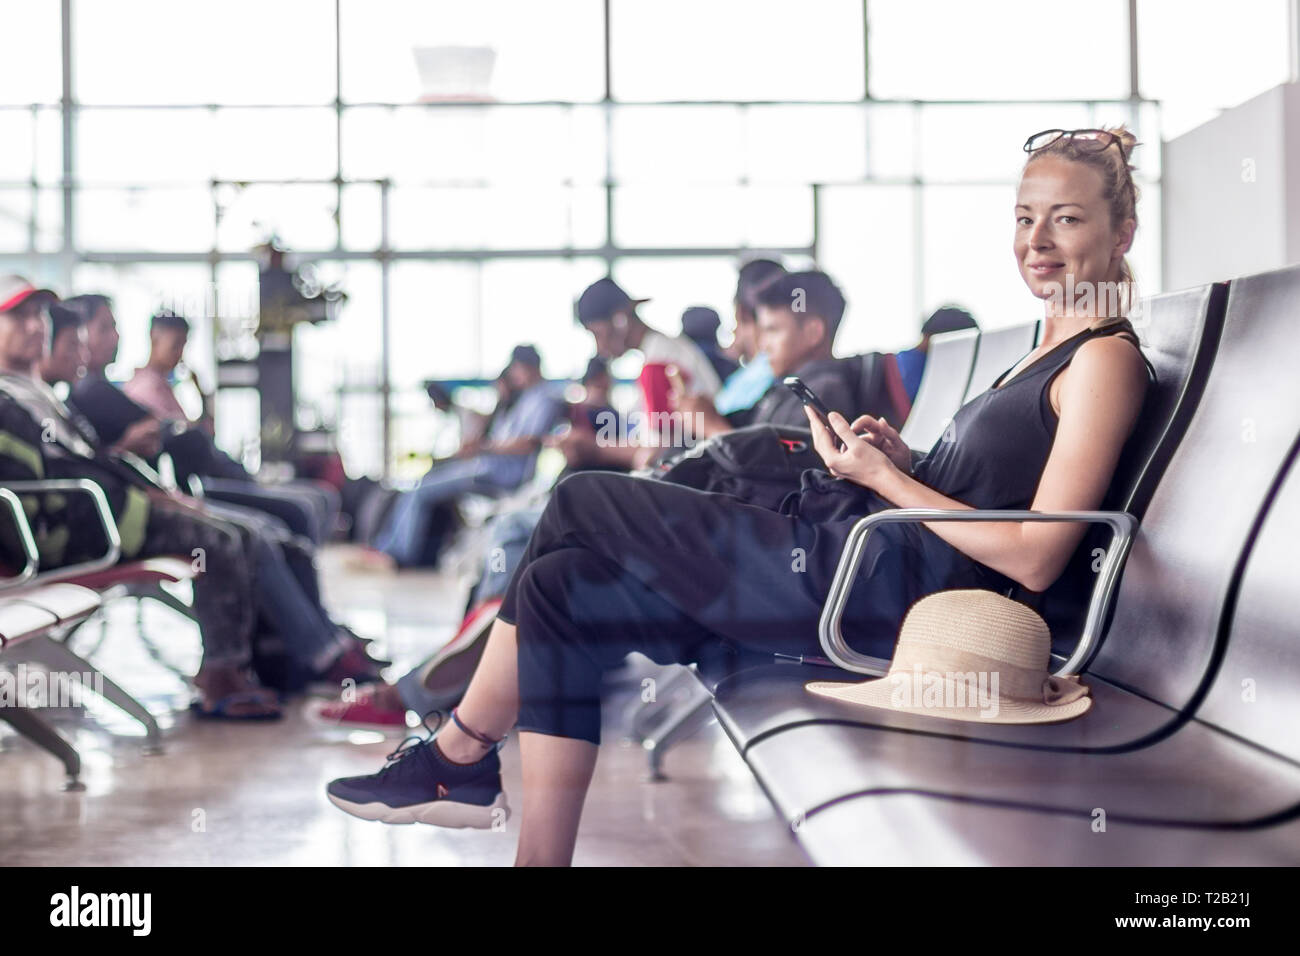 Female traveler using her cell phone while waiting to board a plane at departure gates at asian airport terminal. Stock Photo